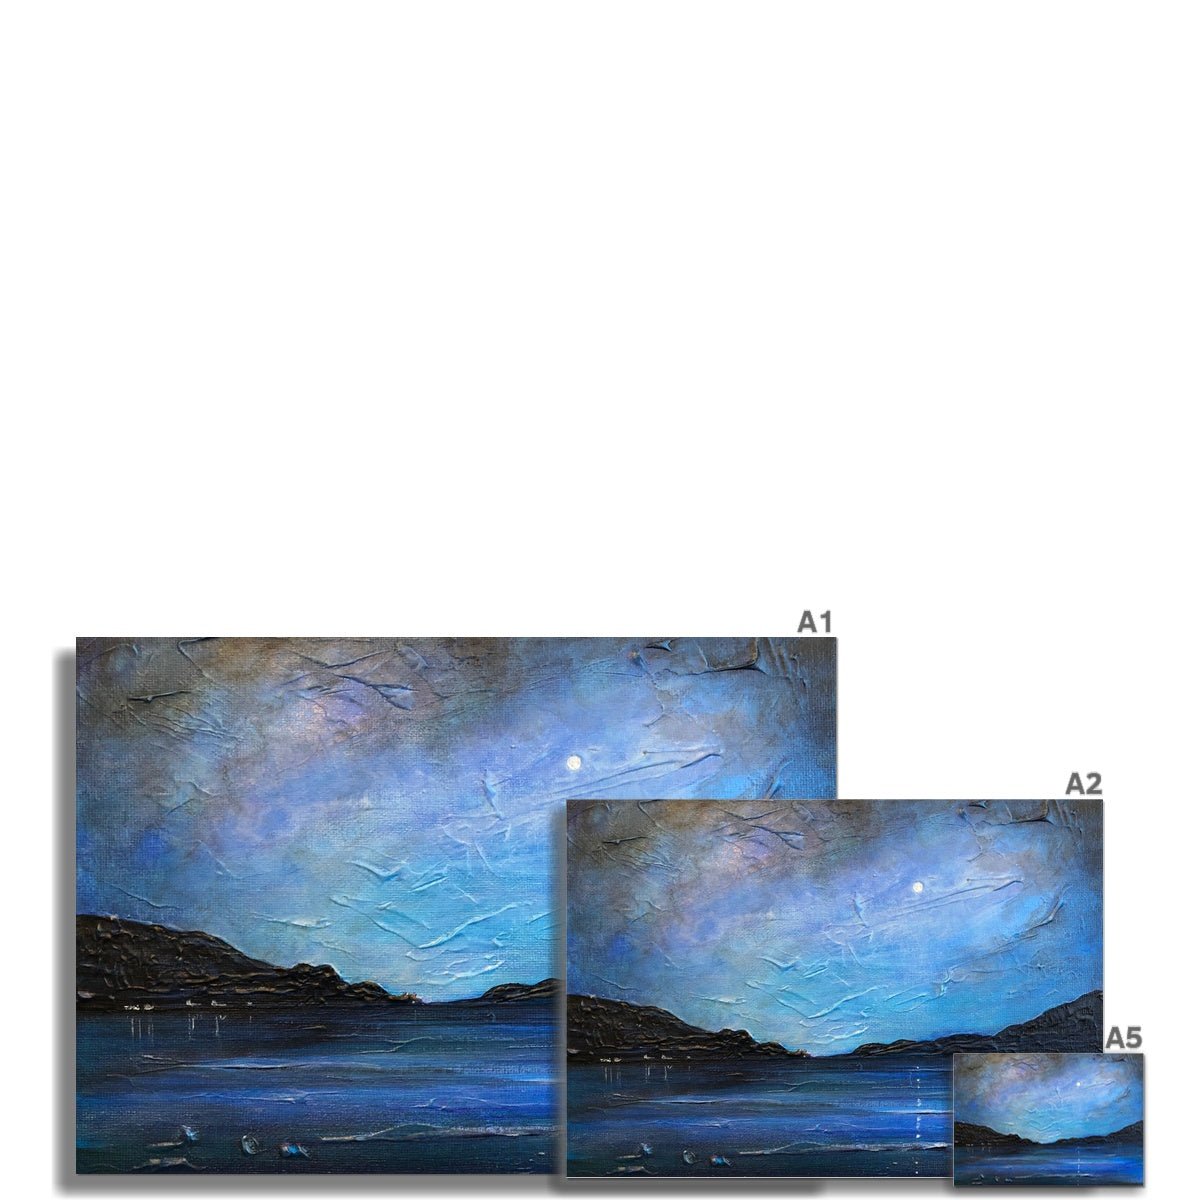 Loch Ness Moonlight Painting | Fine Art Prints From Scotland-Unframed Prints-Scottish Lochs & Mountains Art Gallery-Paintings, Prints, Homeware, Art Gifts From Scotland By Scottish Artist Kevin Hunter